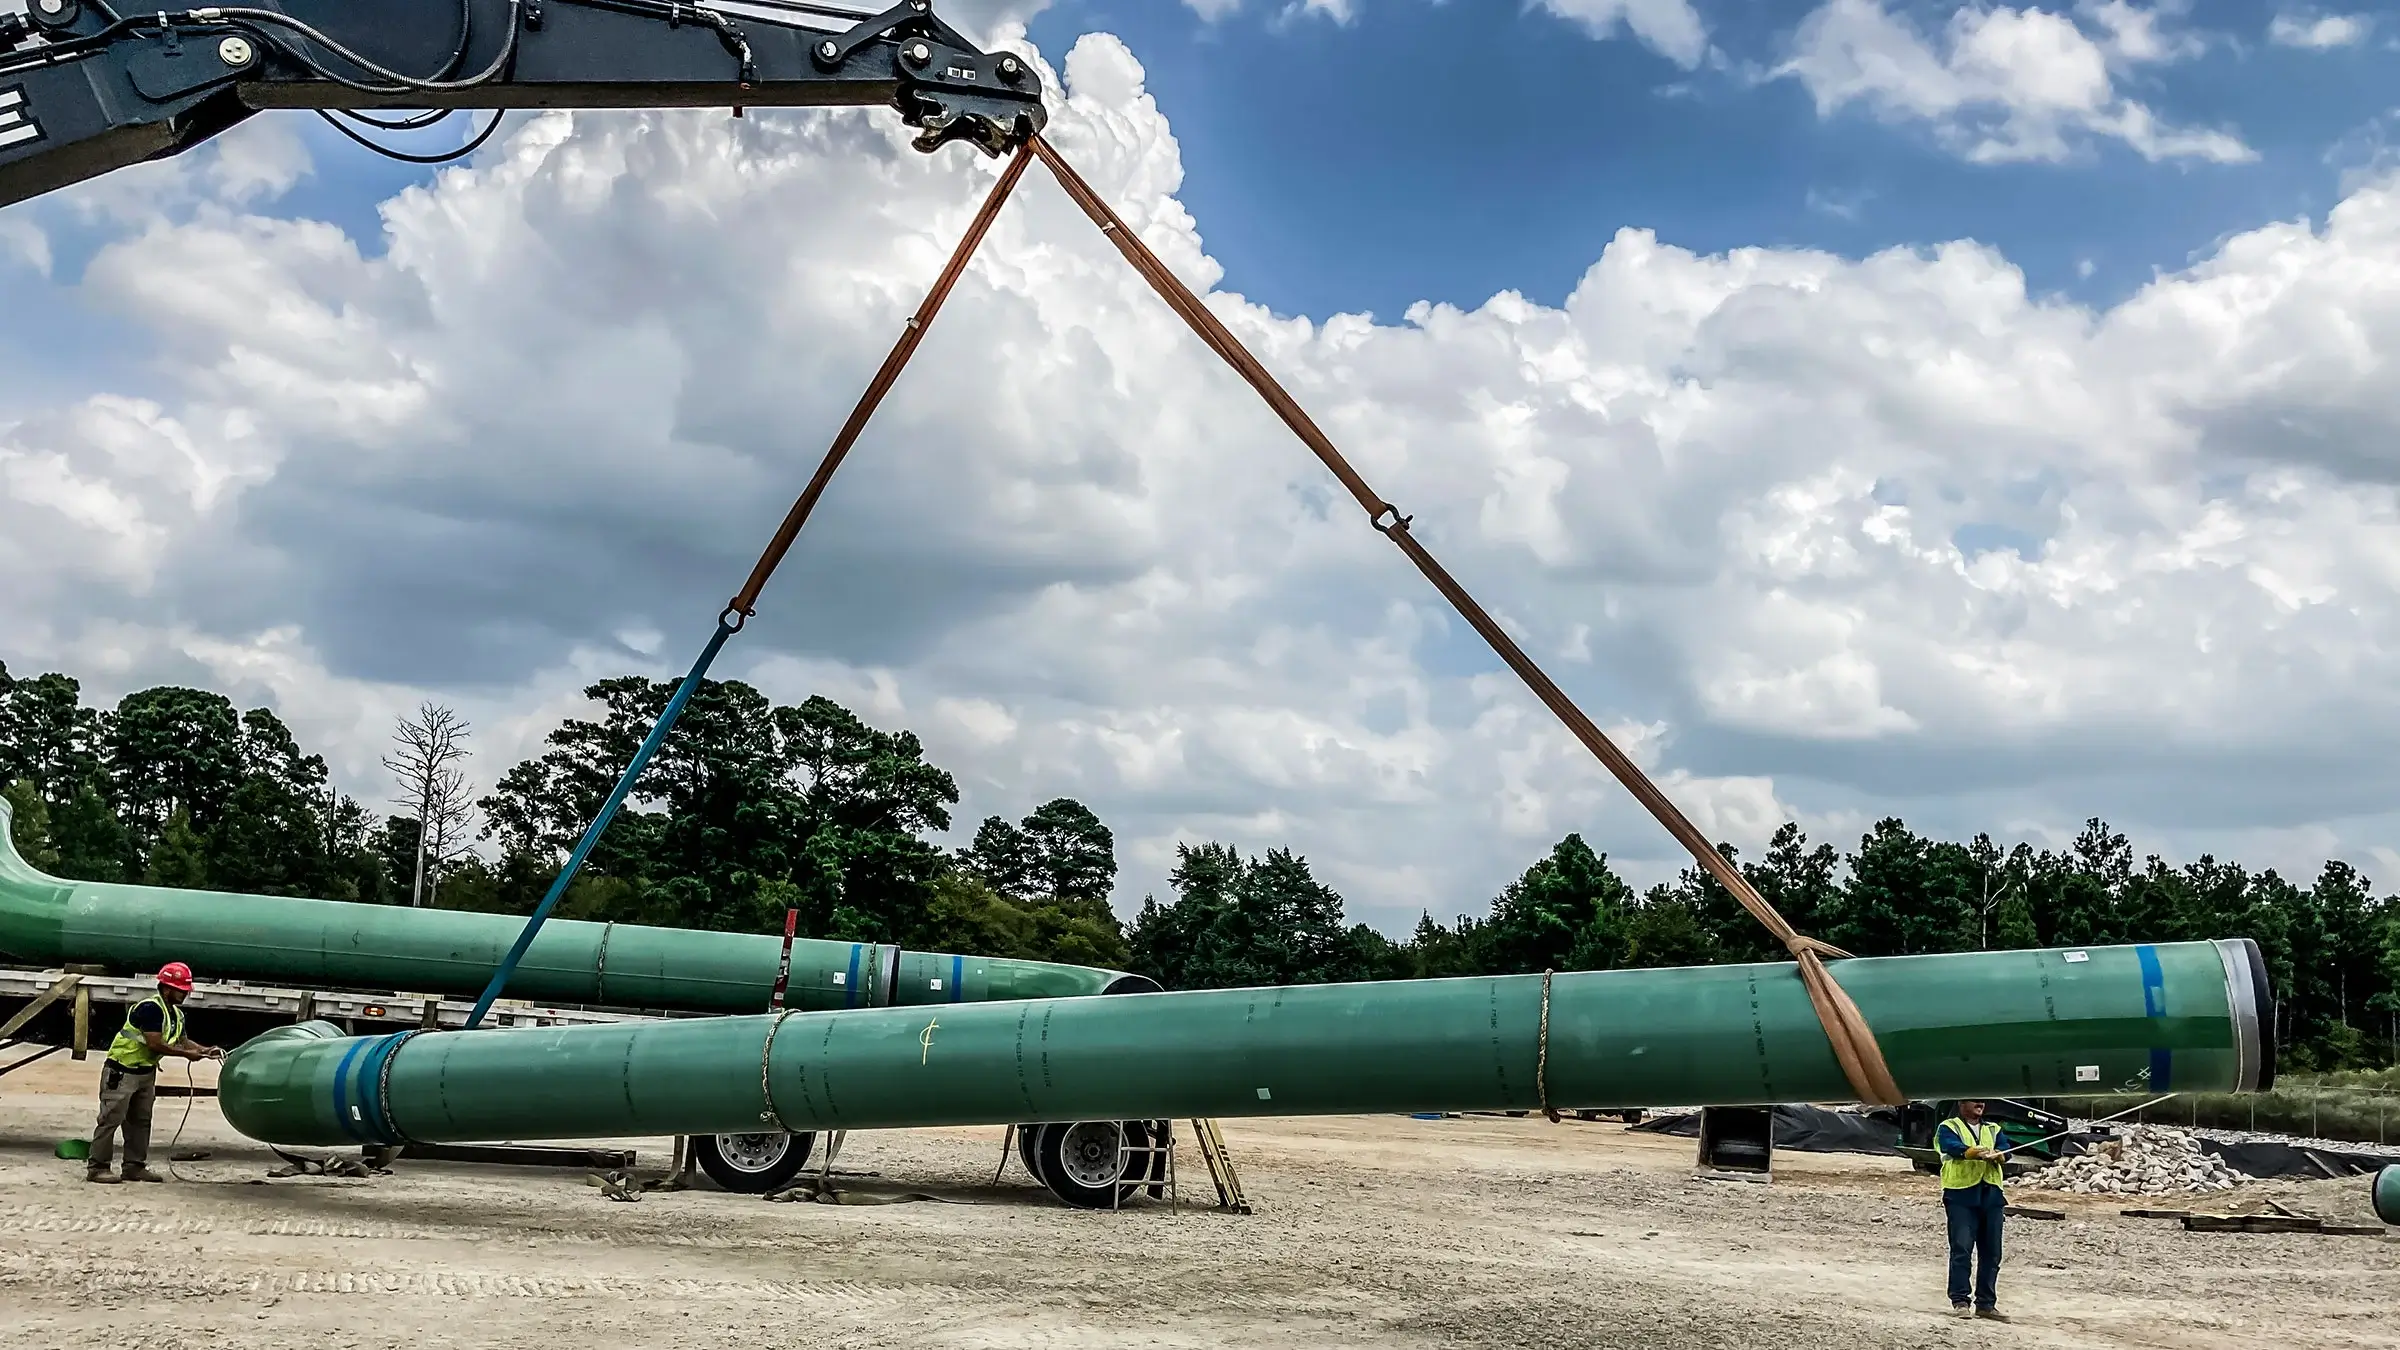 A large portion of large diameter pipe being lifted in the air by heavy equipment